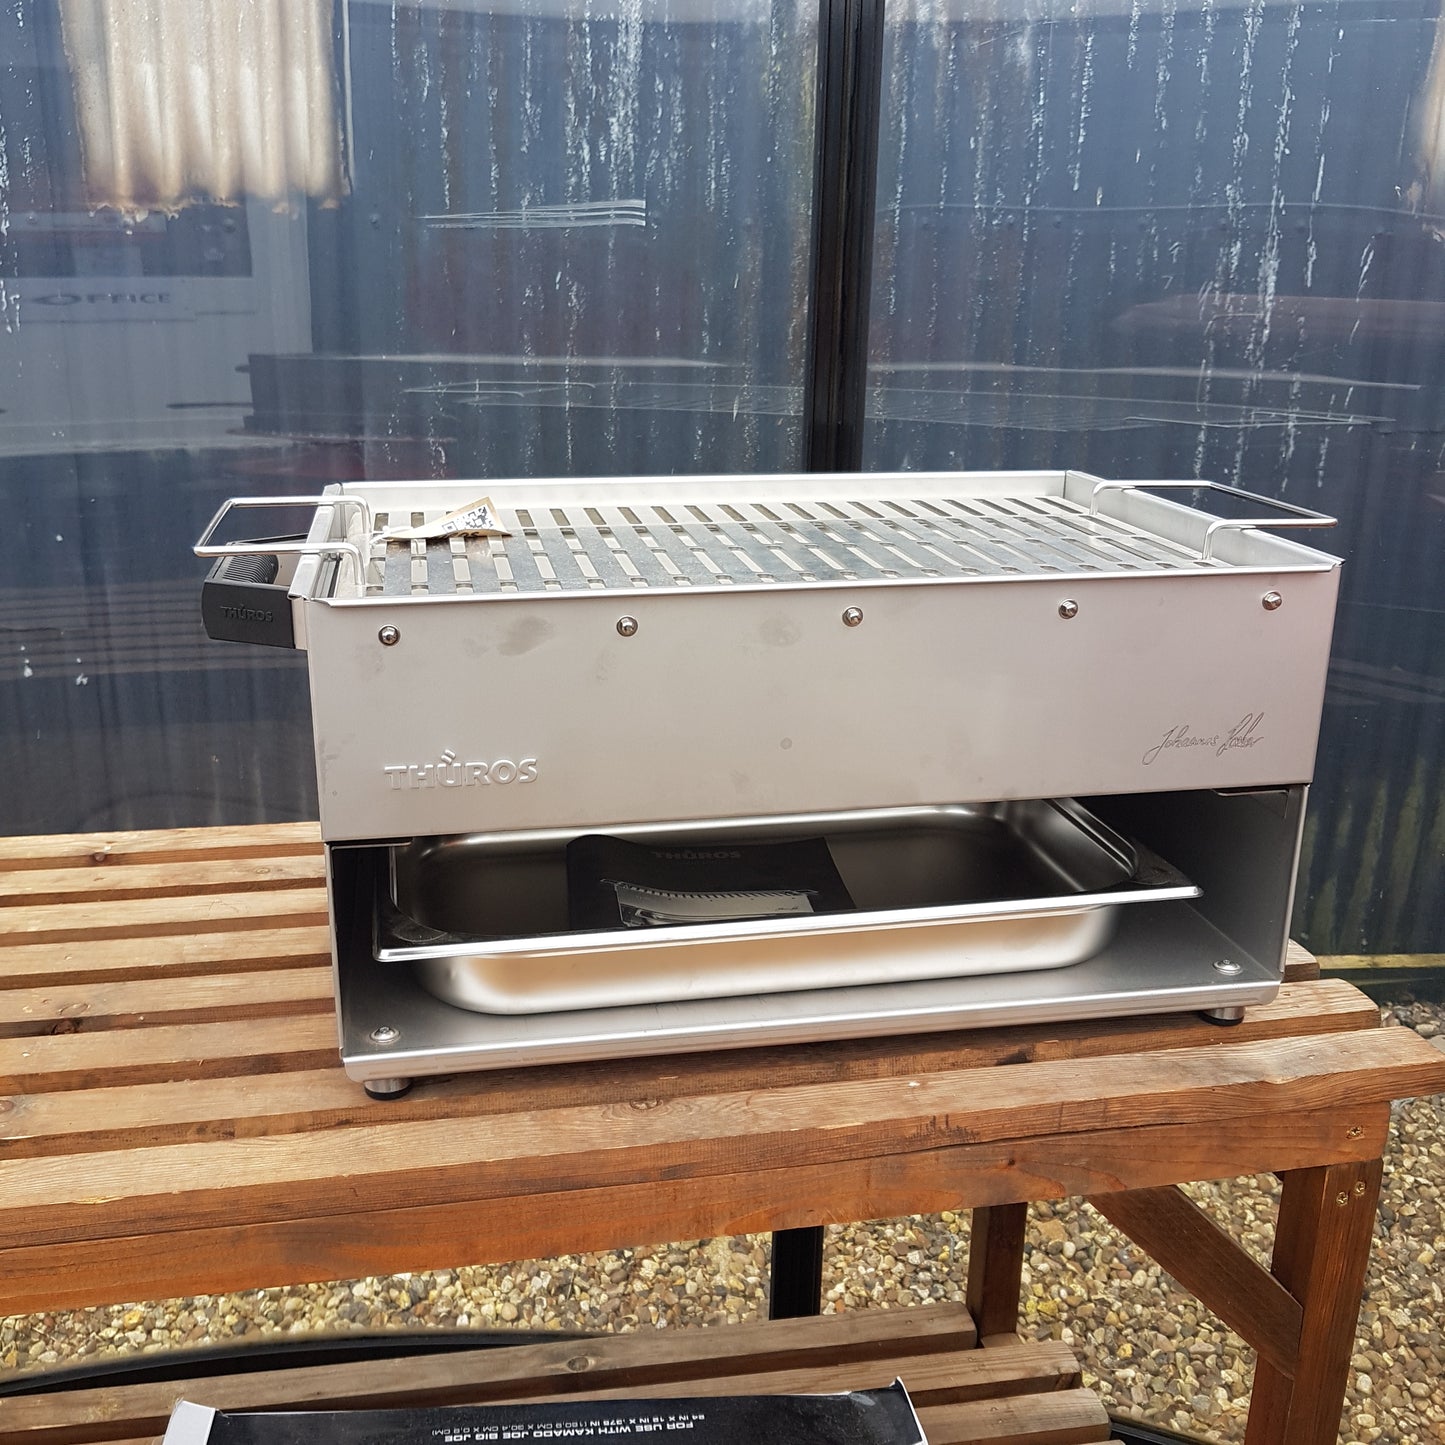 Ex-Display Thuros Multi King Charcoal BBQ Grill with Minor Damage